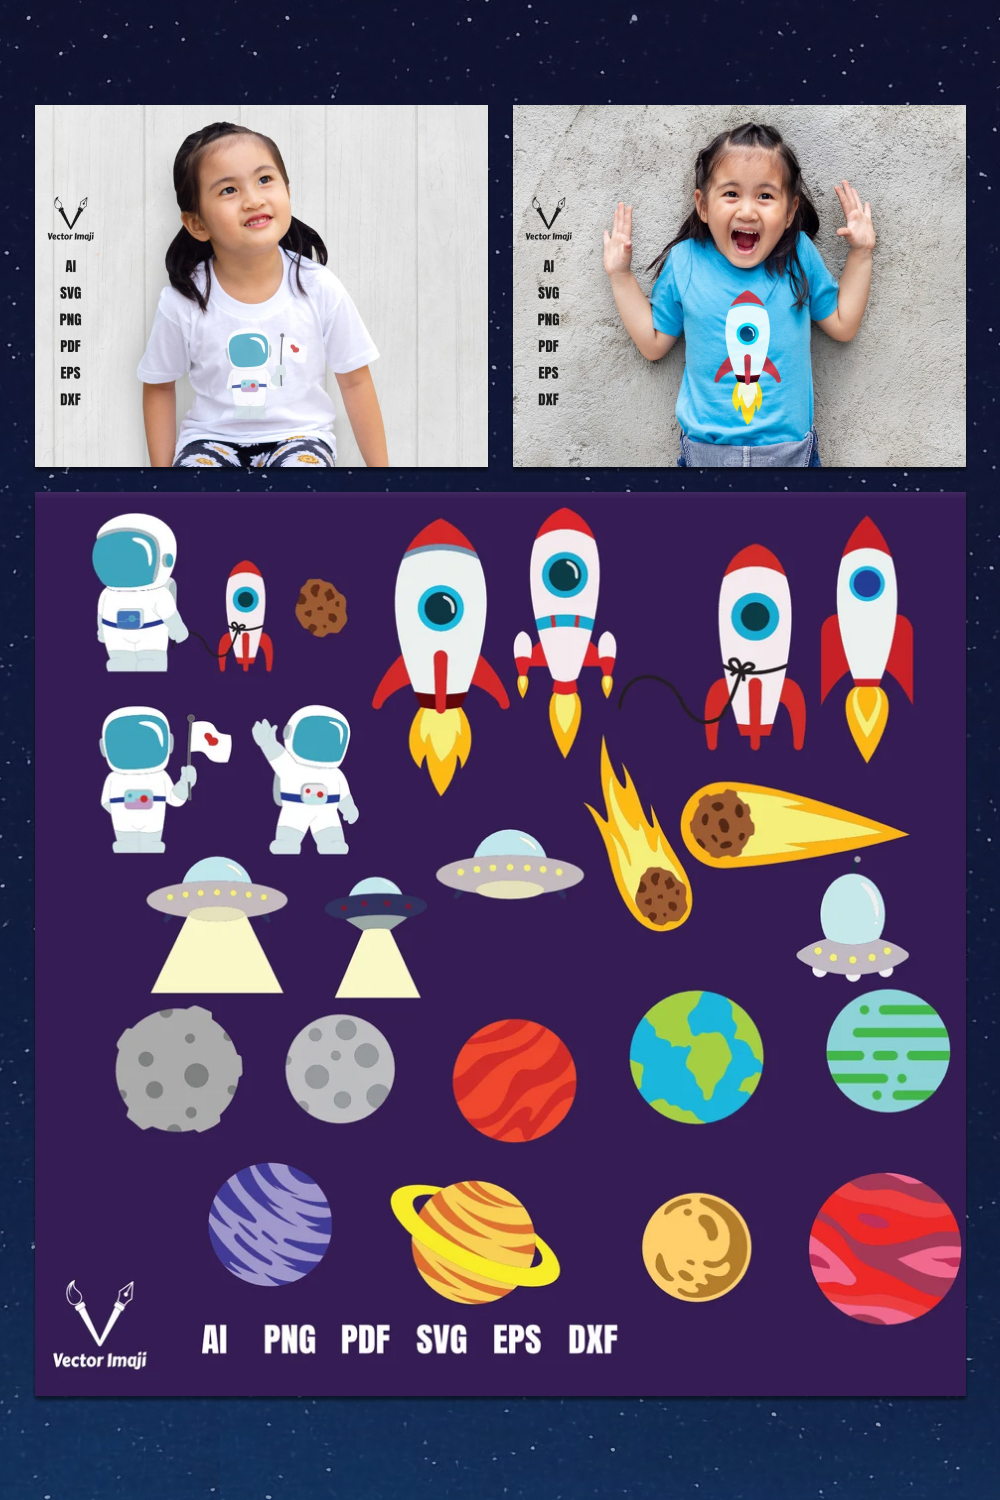 Prints with comets, planets, rockets, and rockets.